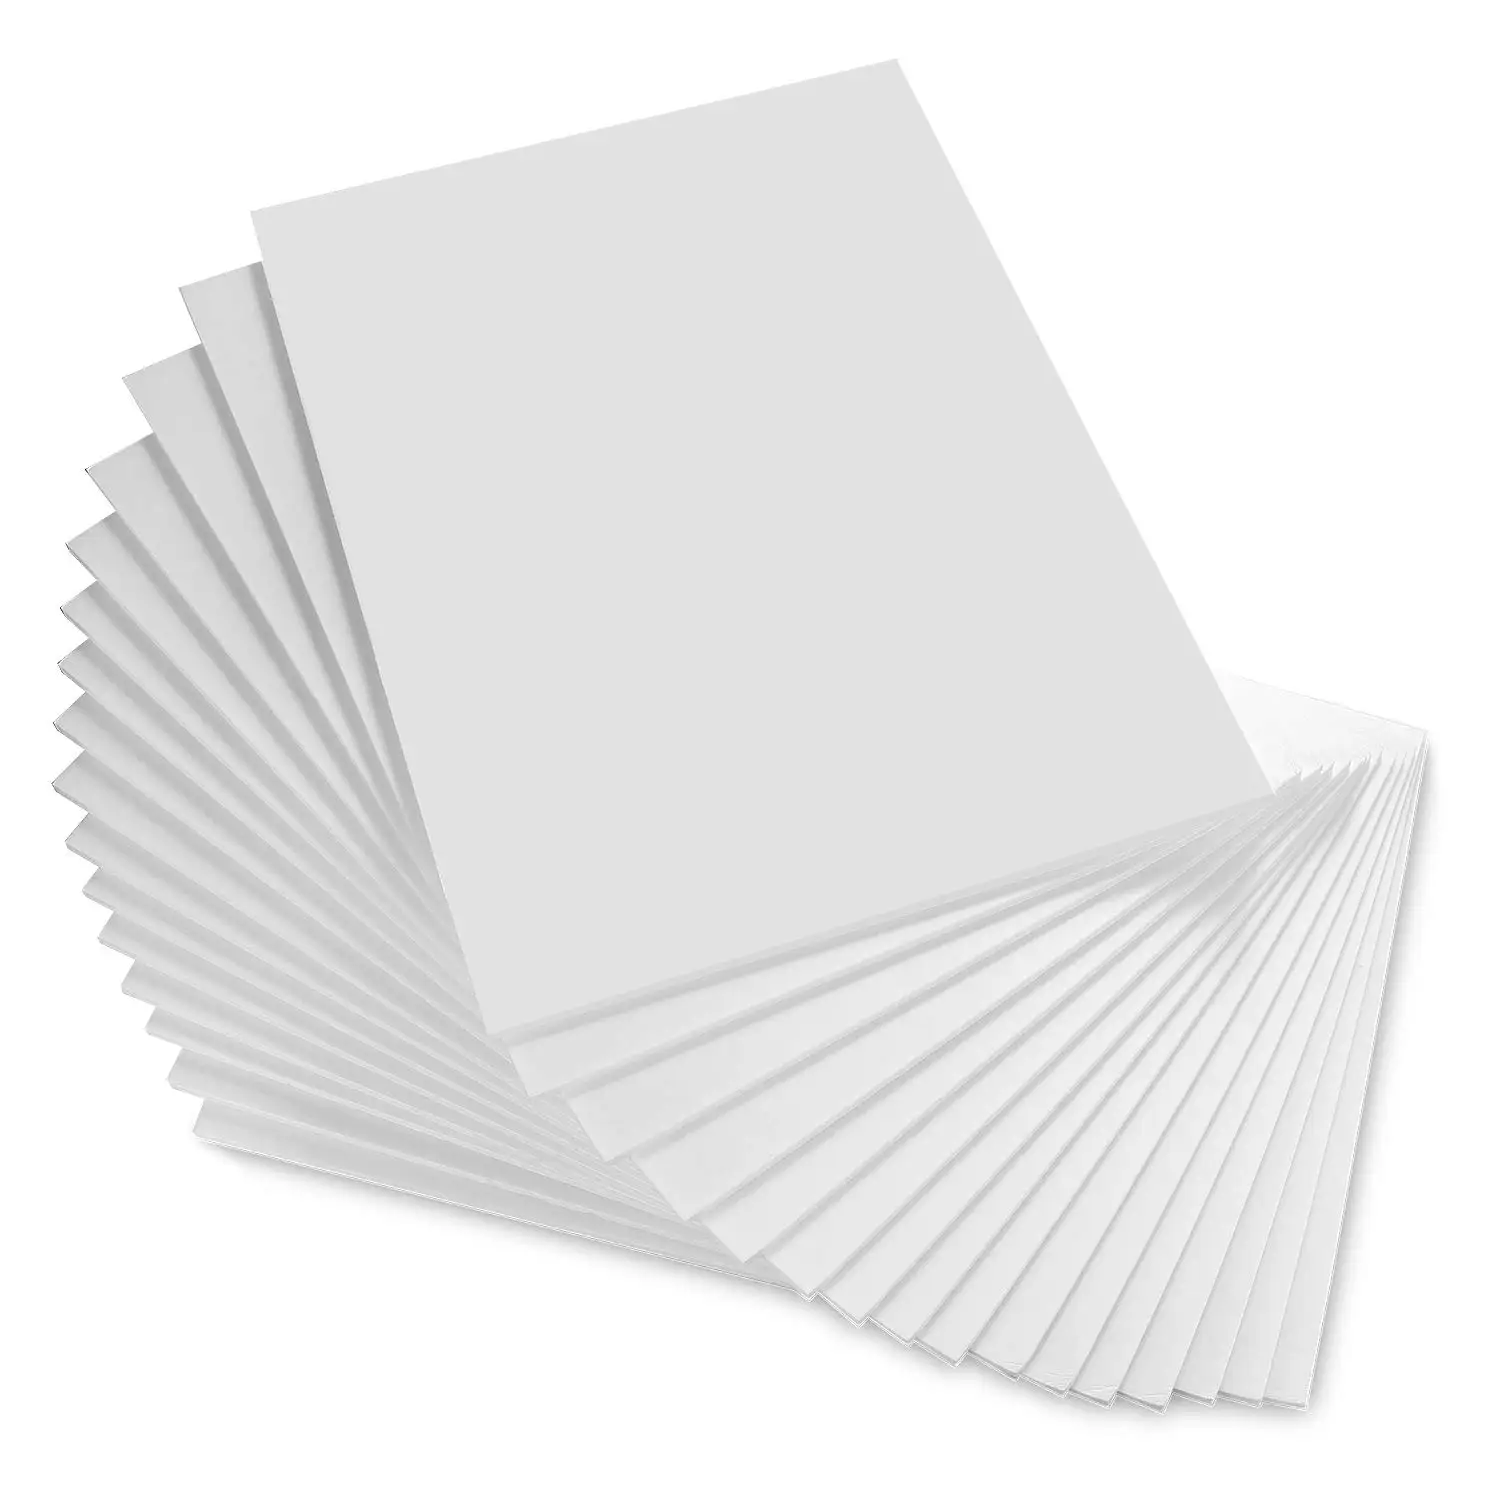 White Color Woodfree Offset Paper/Bond Paper 55-180GSM - China Offset  Paper, Uncoated Paper